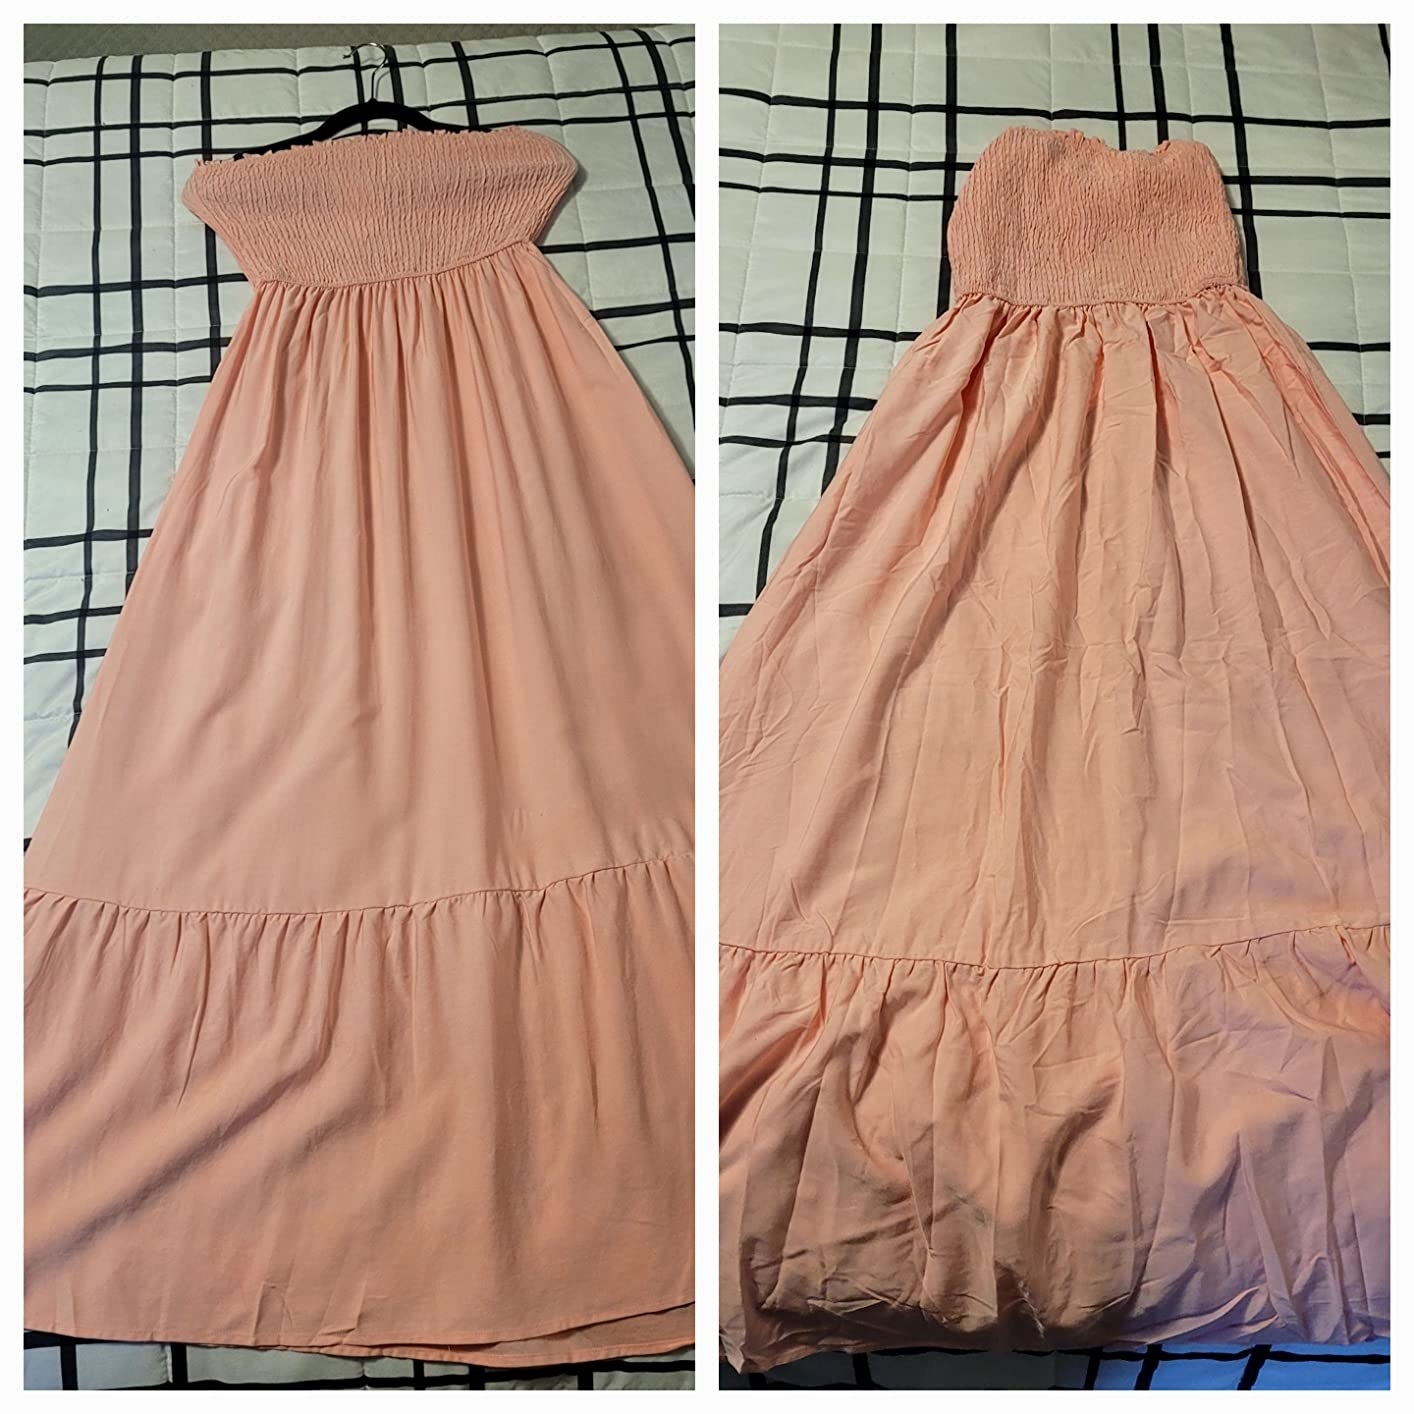 a side by side pictures of a sundress with wrinkles and the same sundress without wrinkles